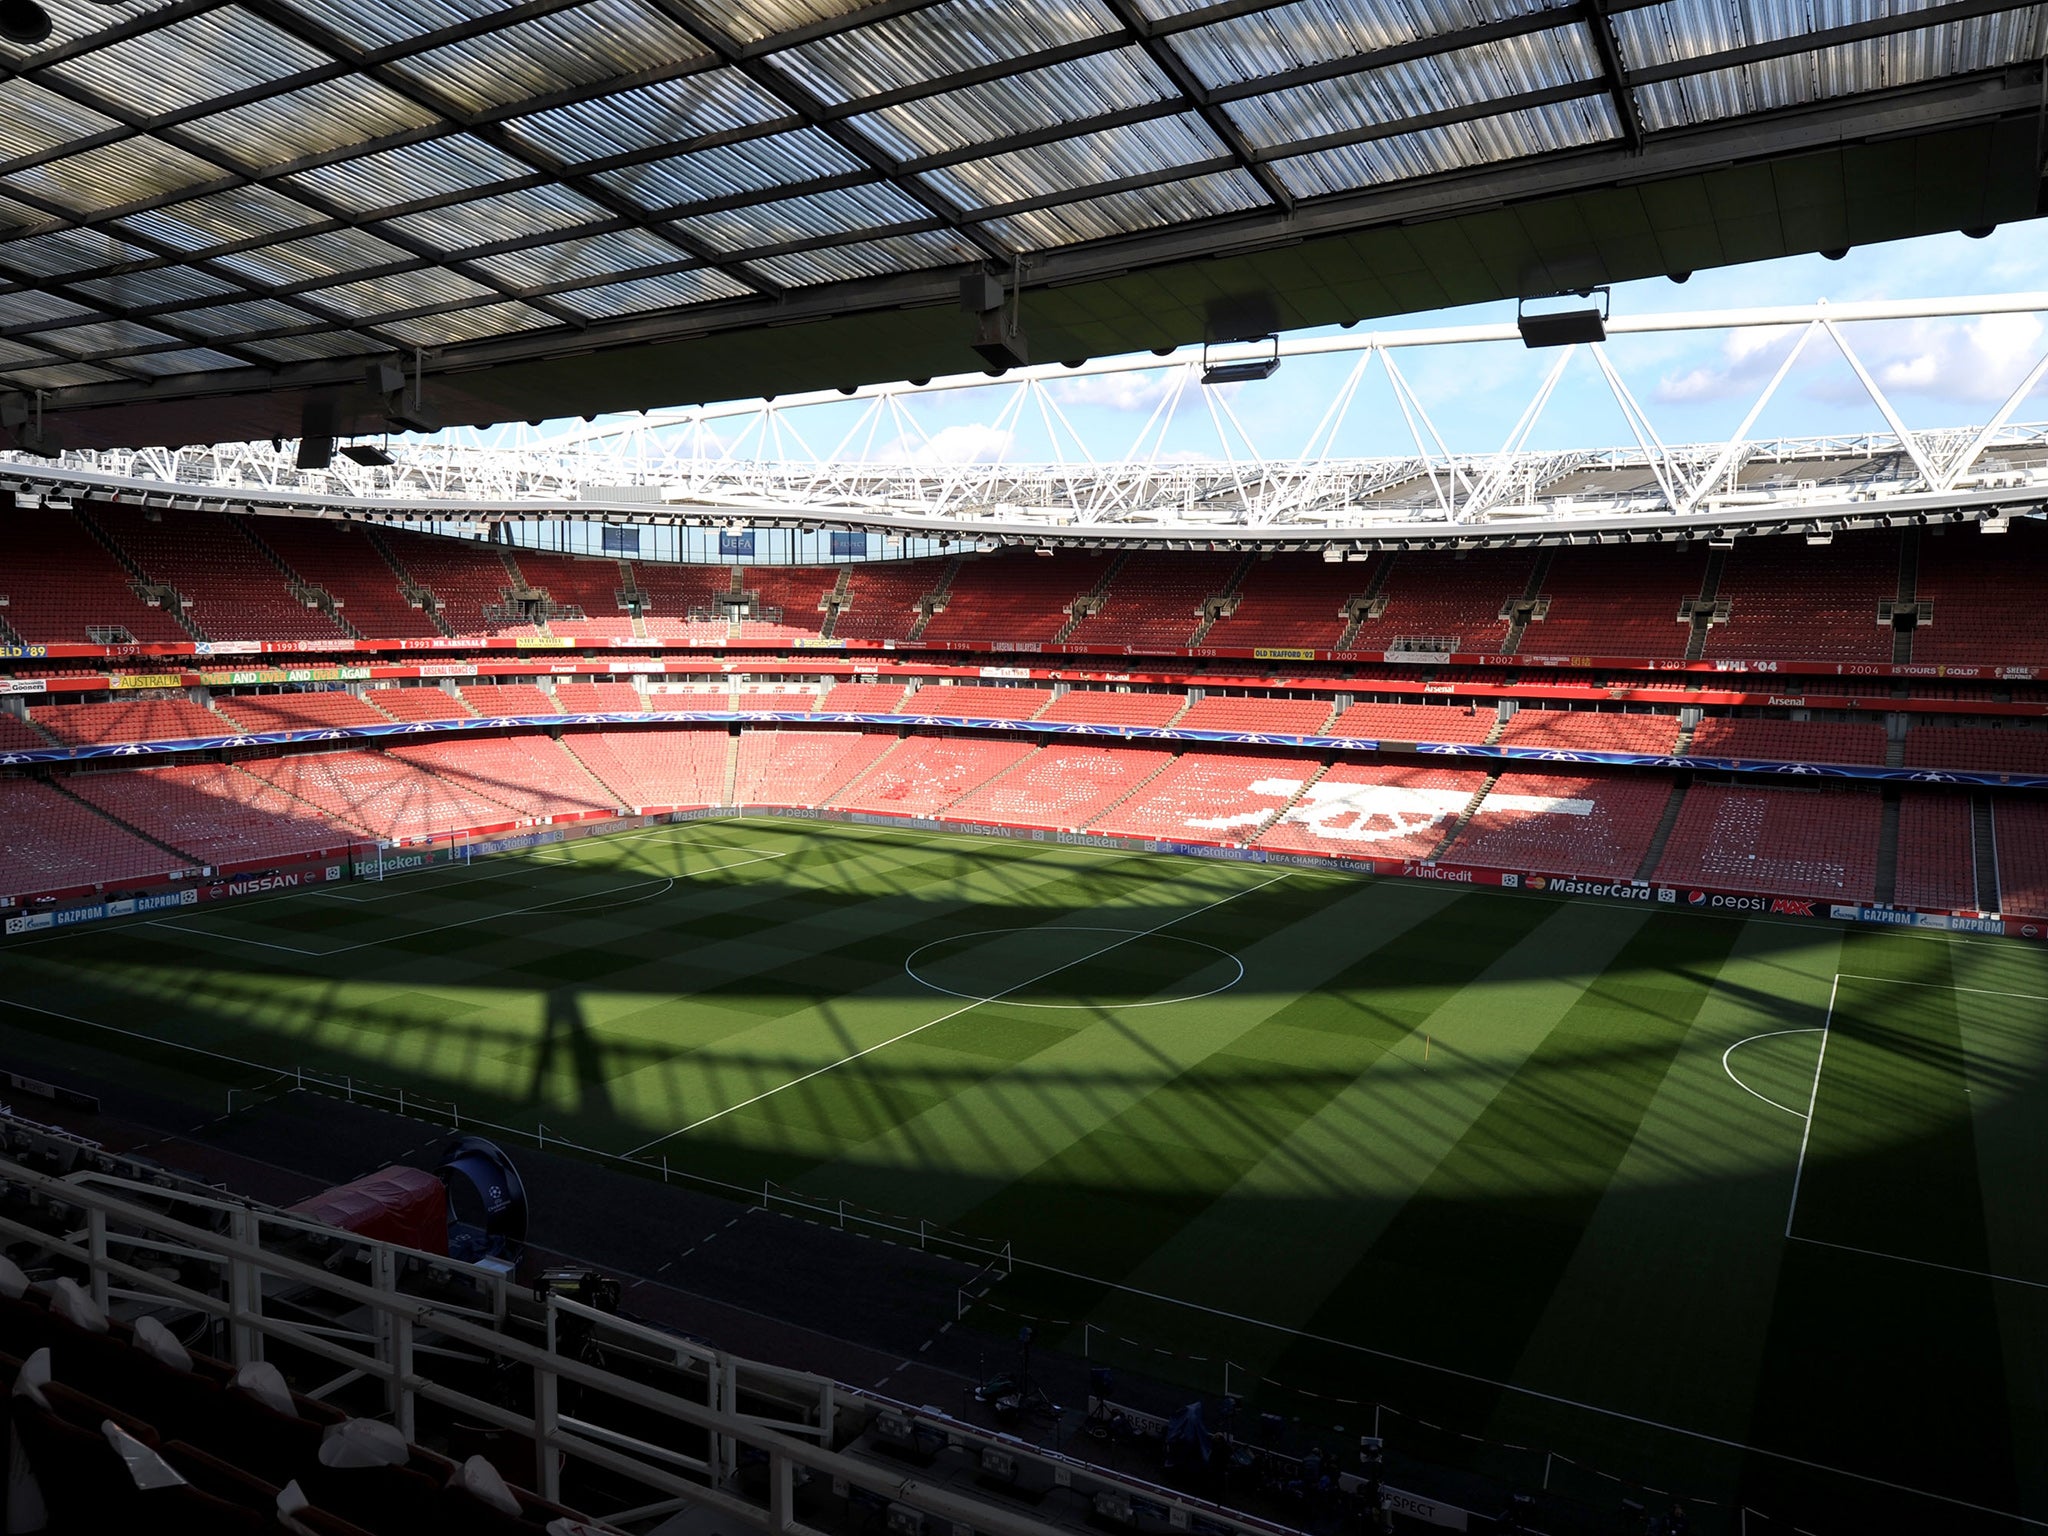 A view of the Emirates Stadium